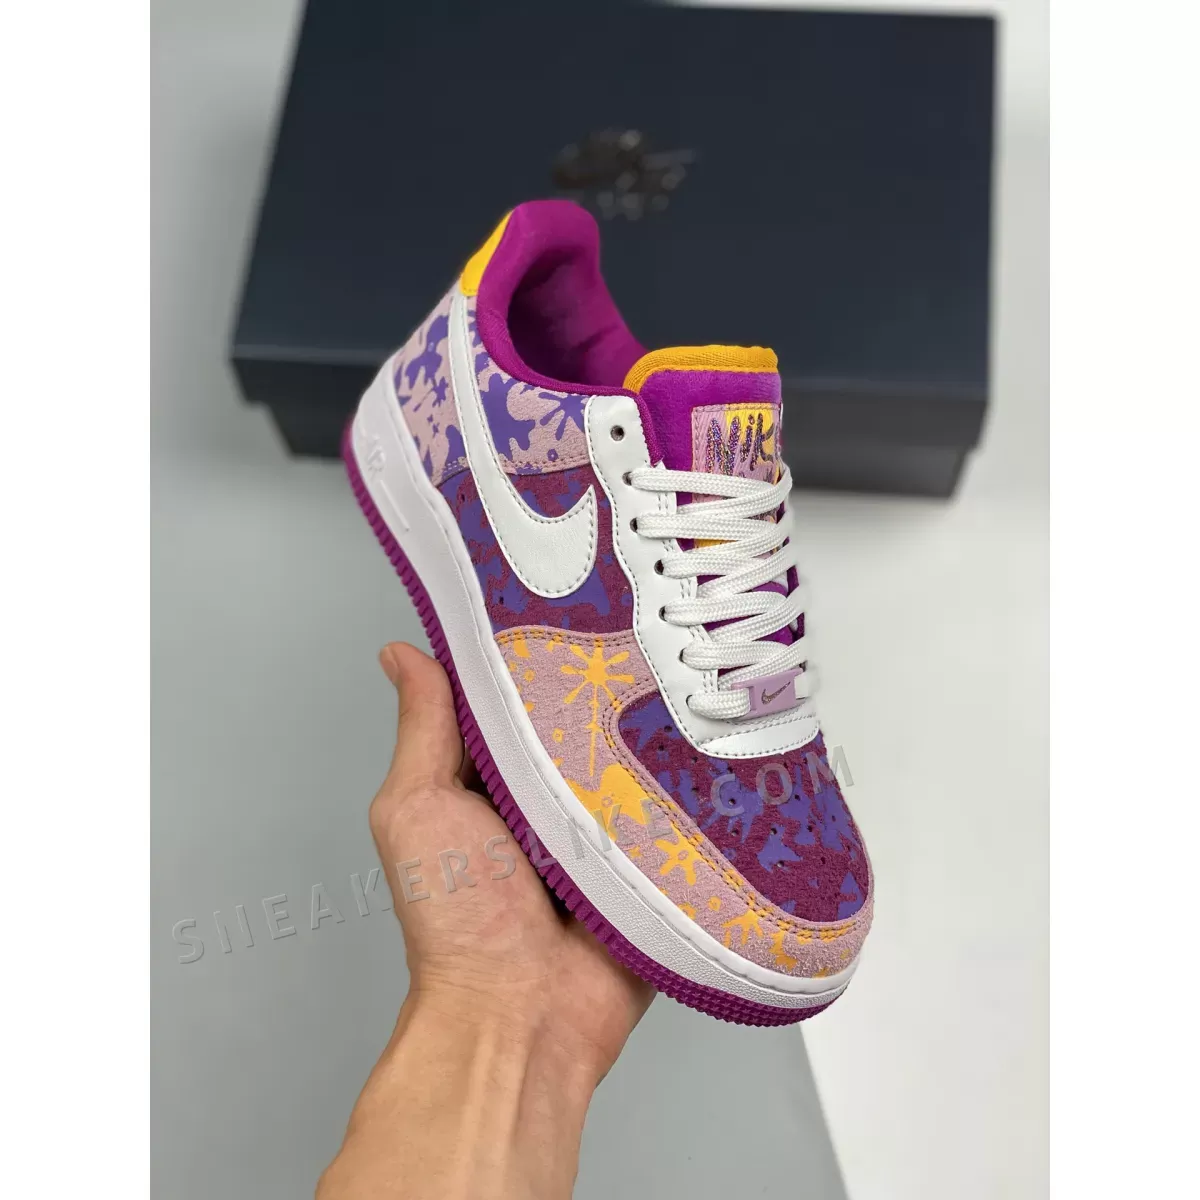 Nike Air Force 1 Low Red Plum/Light Arctic Pink-Wild Violet-White / pink and red air force ones